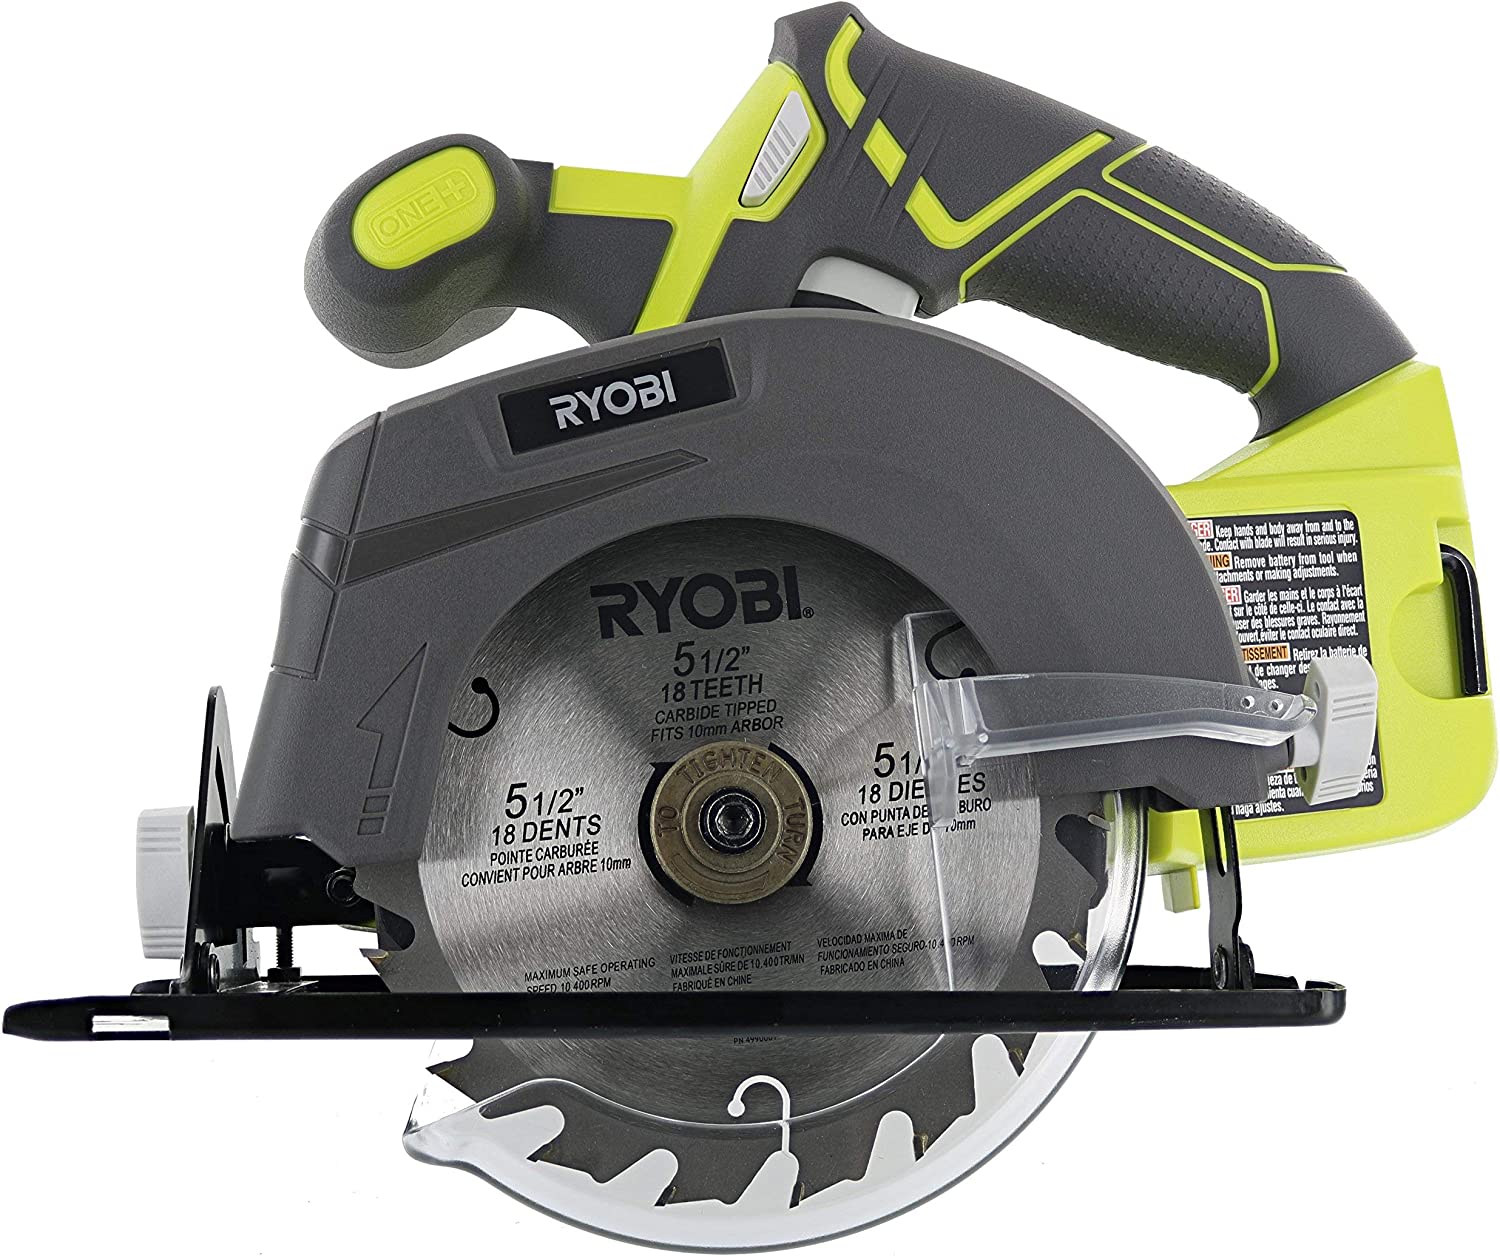 Ryobi One P505 18V Lithium Ion Cordless 5 1 2 4,700 RPM Circular Saw (Battery Not Included, Power Tool Only), Green